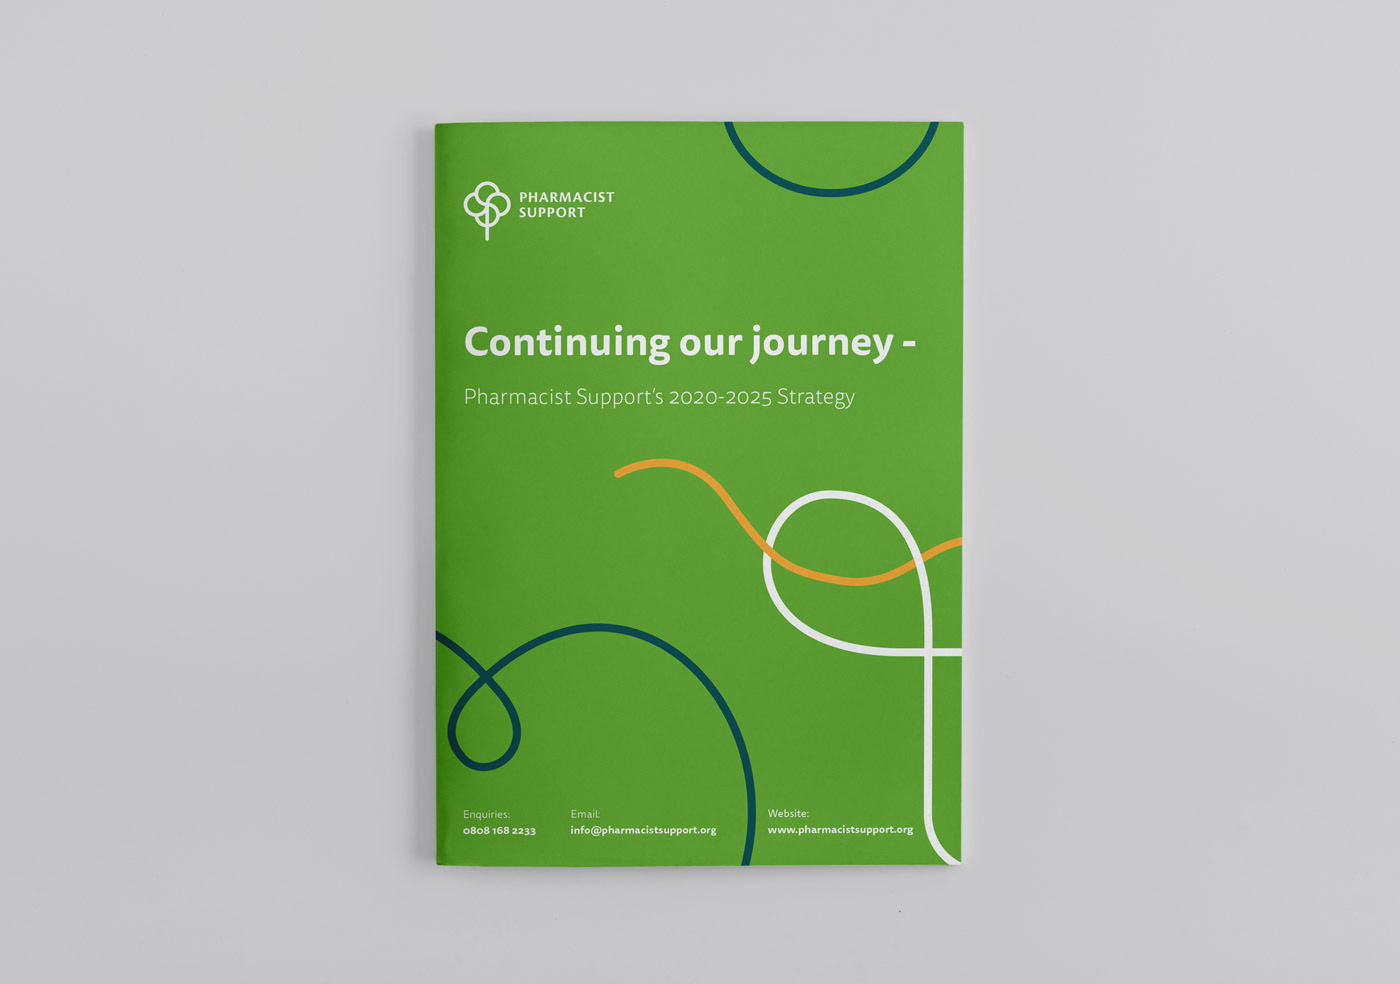 Pharmacist Support 5 Year Strategy document front cover. The title reads: "Continuing our journey – Pharmacist Supports 2020-2025 Strategy".